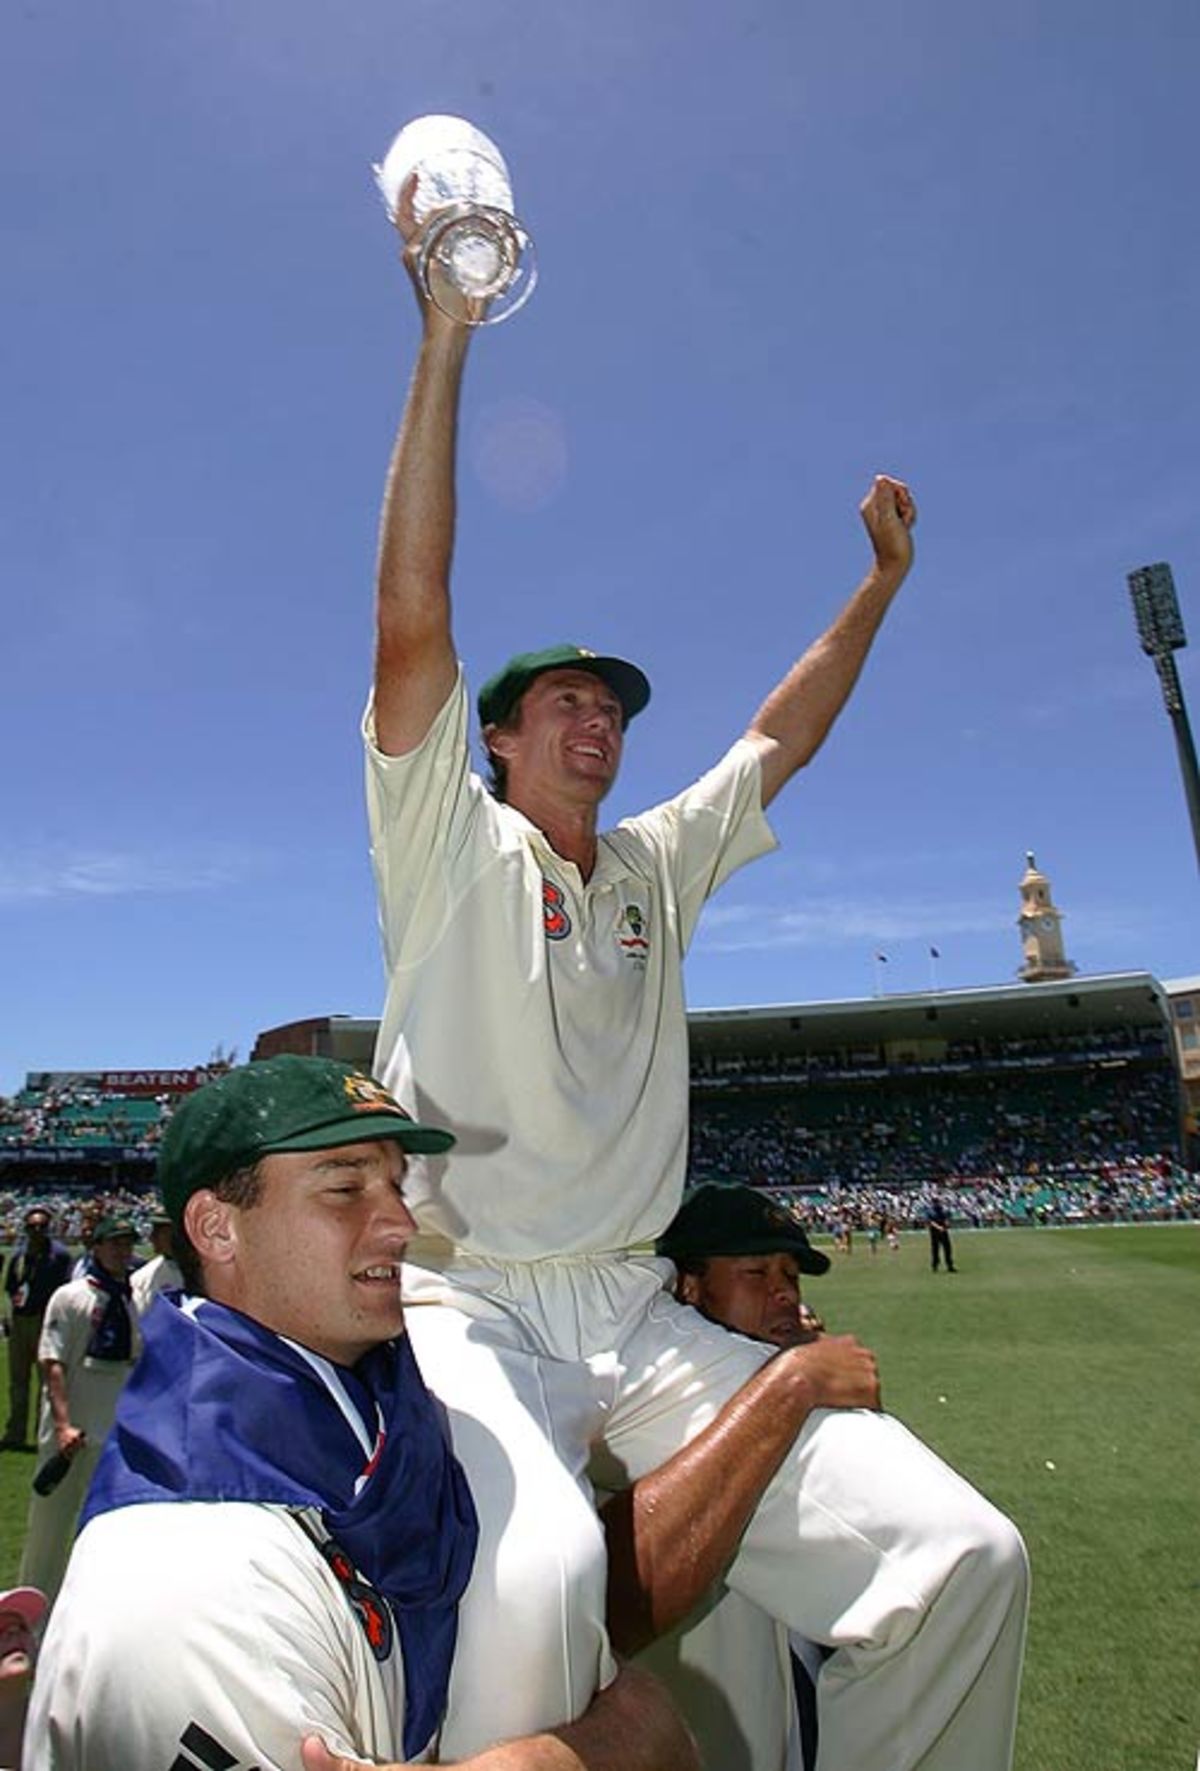 Glenn Mcgrath acknowledging the crowd after playing his final test at Sydney